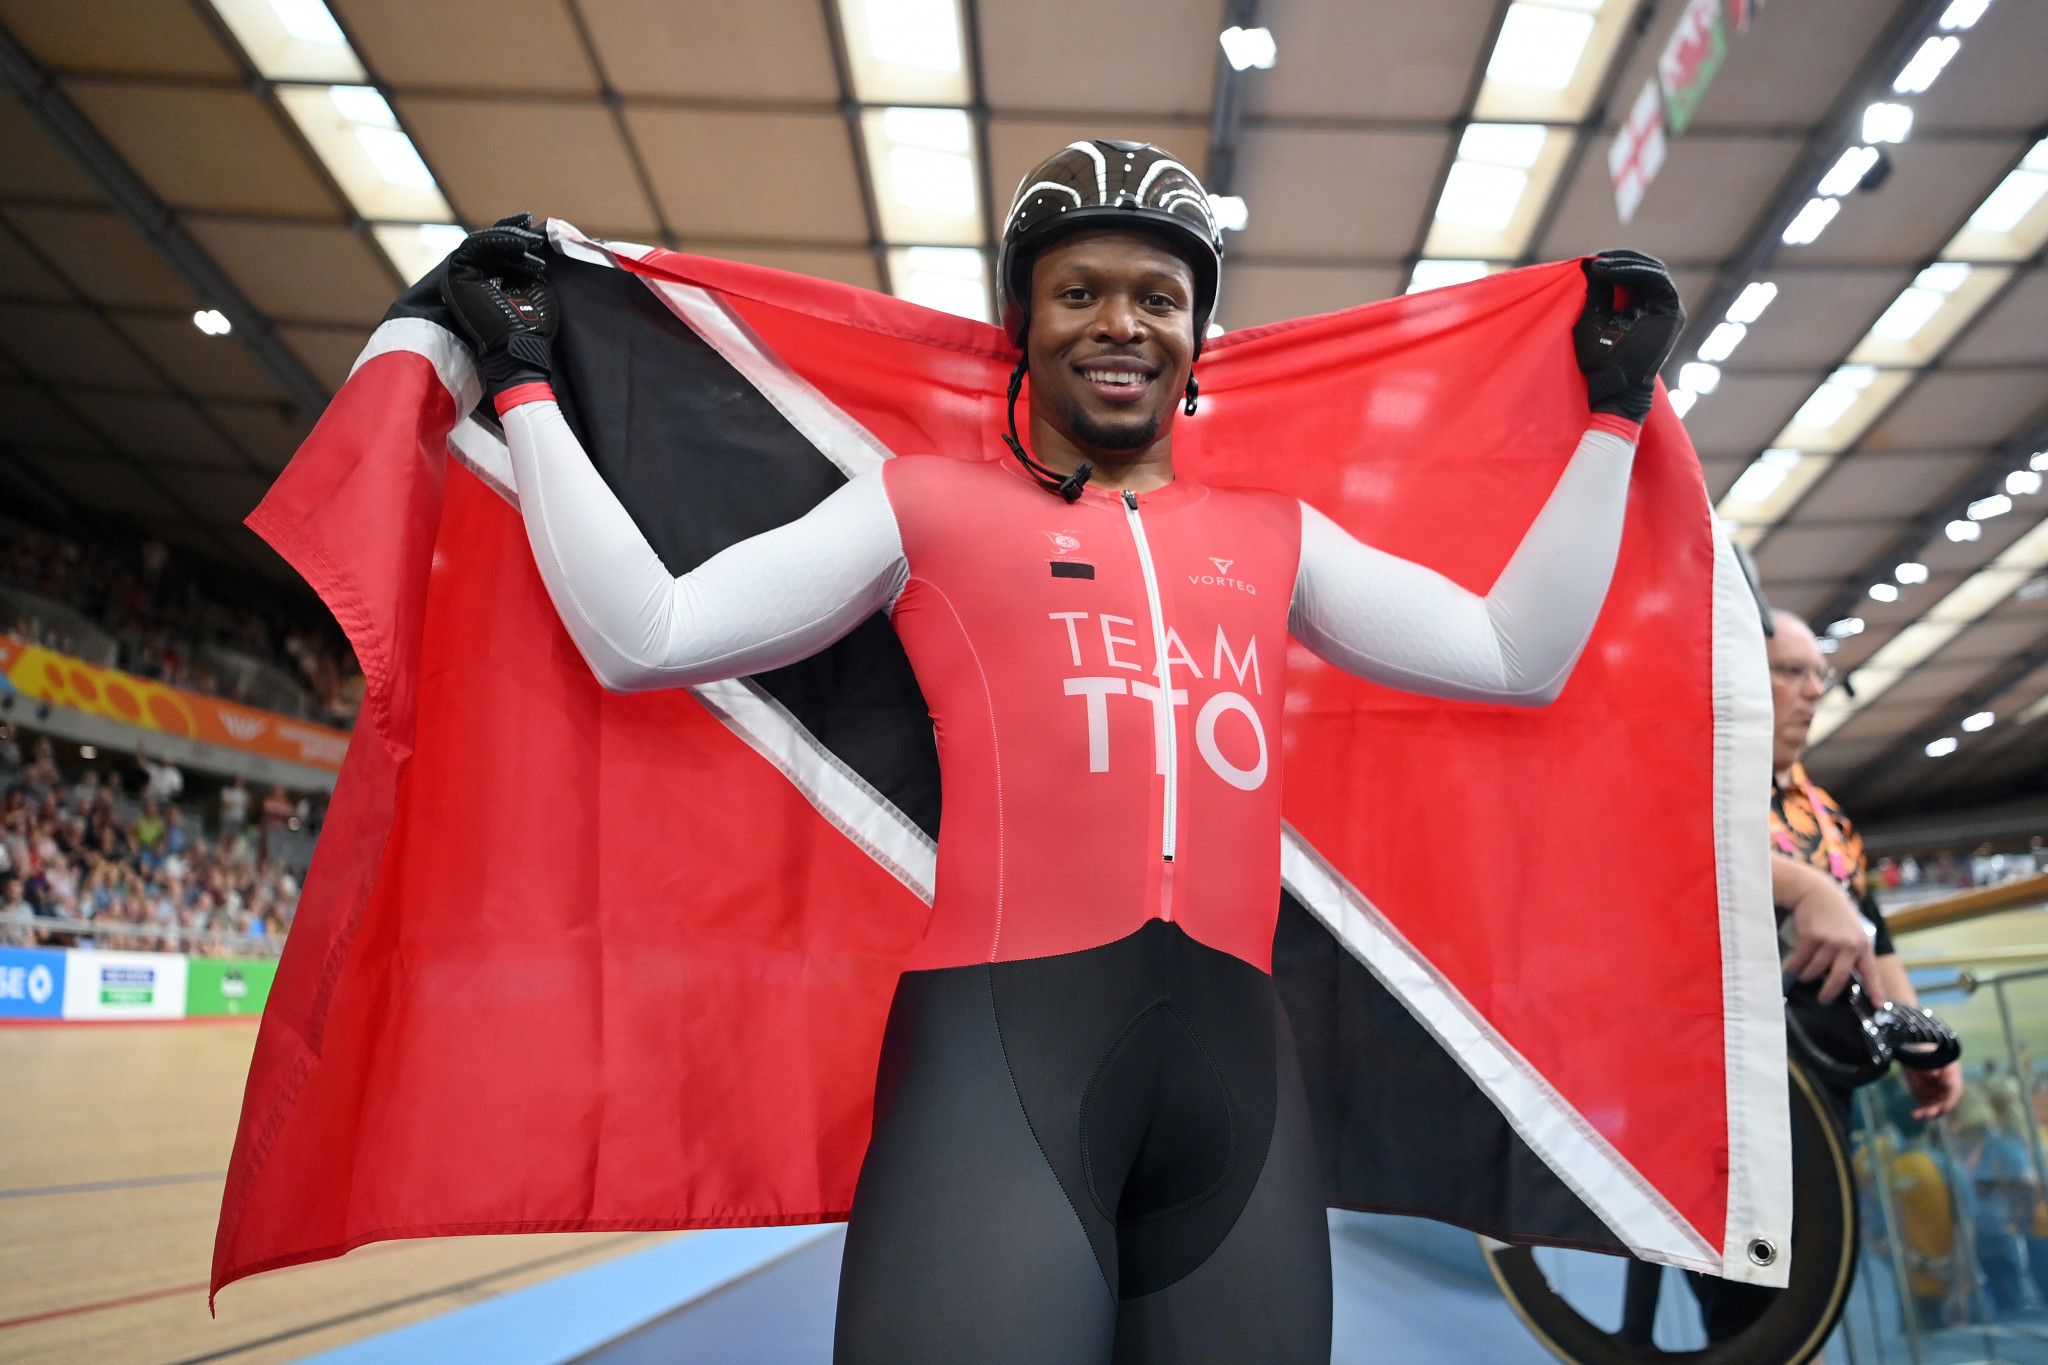 Nicholas Paul is the biggest recipient of the financial winnings ©Getty Images (Obtained via: insidethegames.biz)